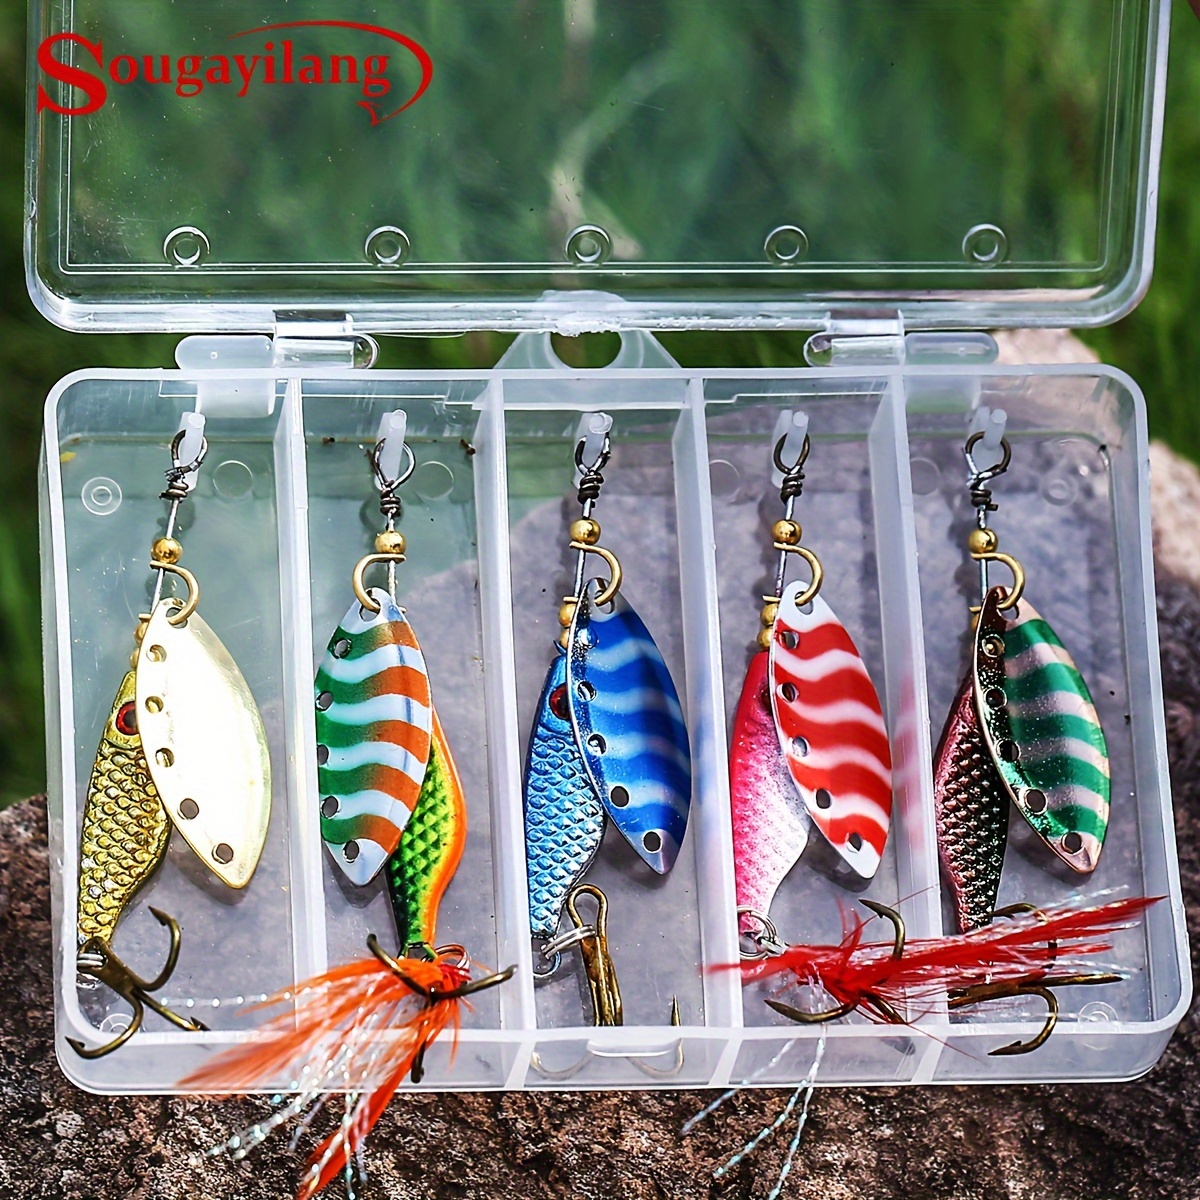 Sougayilang 5pcs/box Metal Spinner Lure, Bionic Fishing Lures For Trout  Pike Perch Salmon Bass, With Hard Metal Hooks, Fishing Tackle